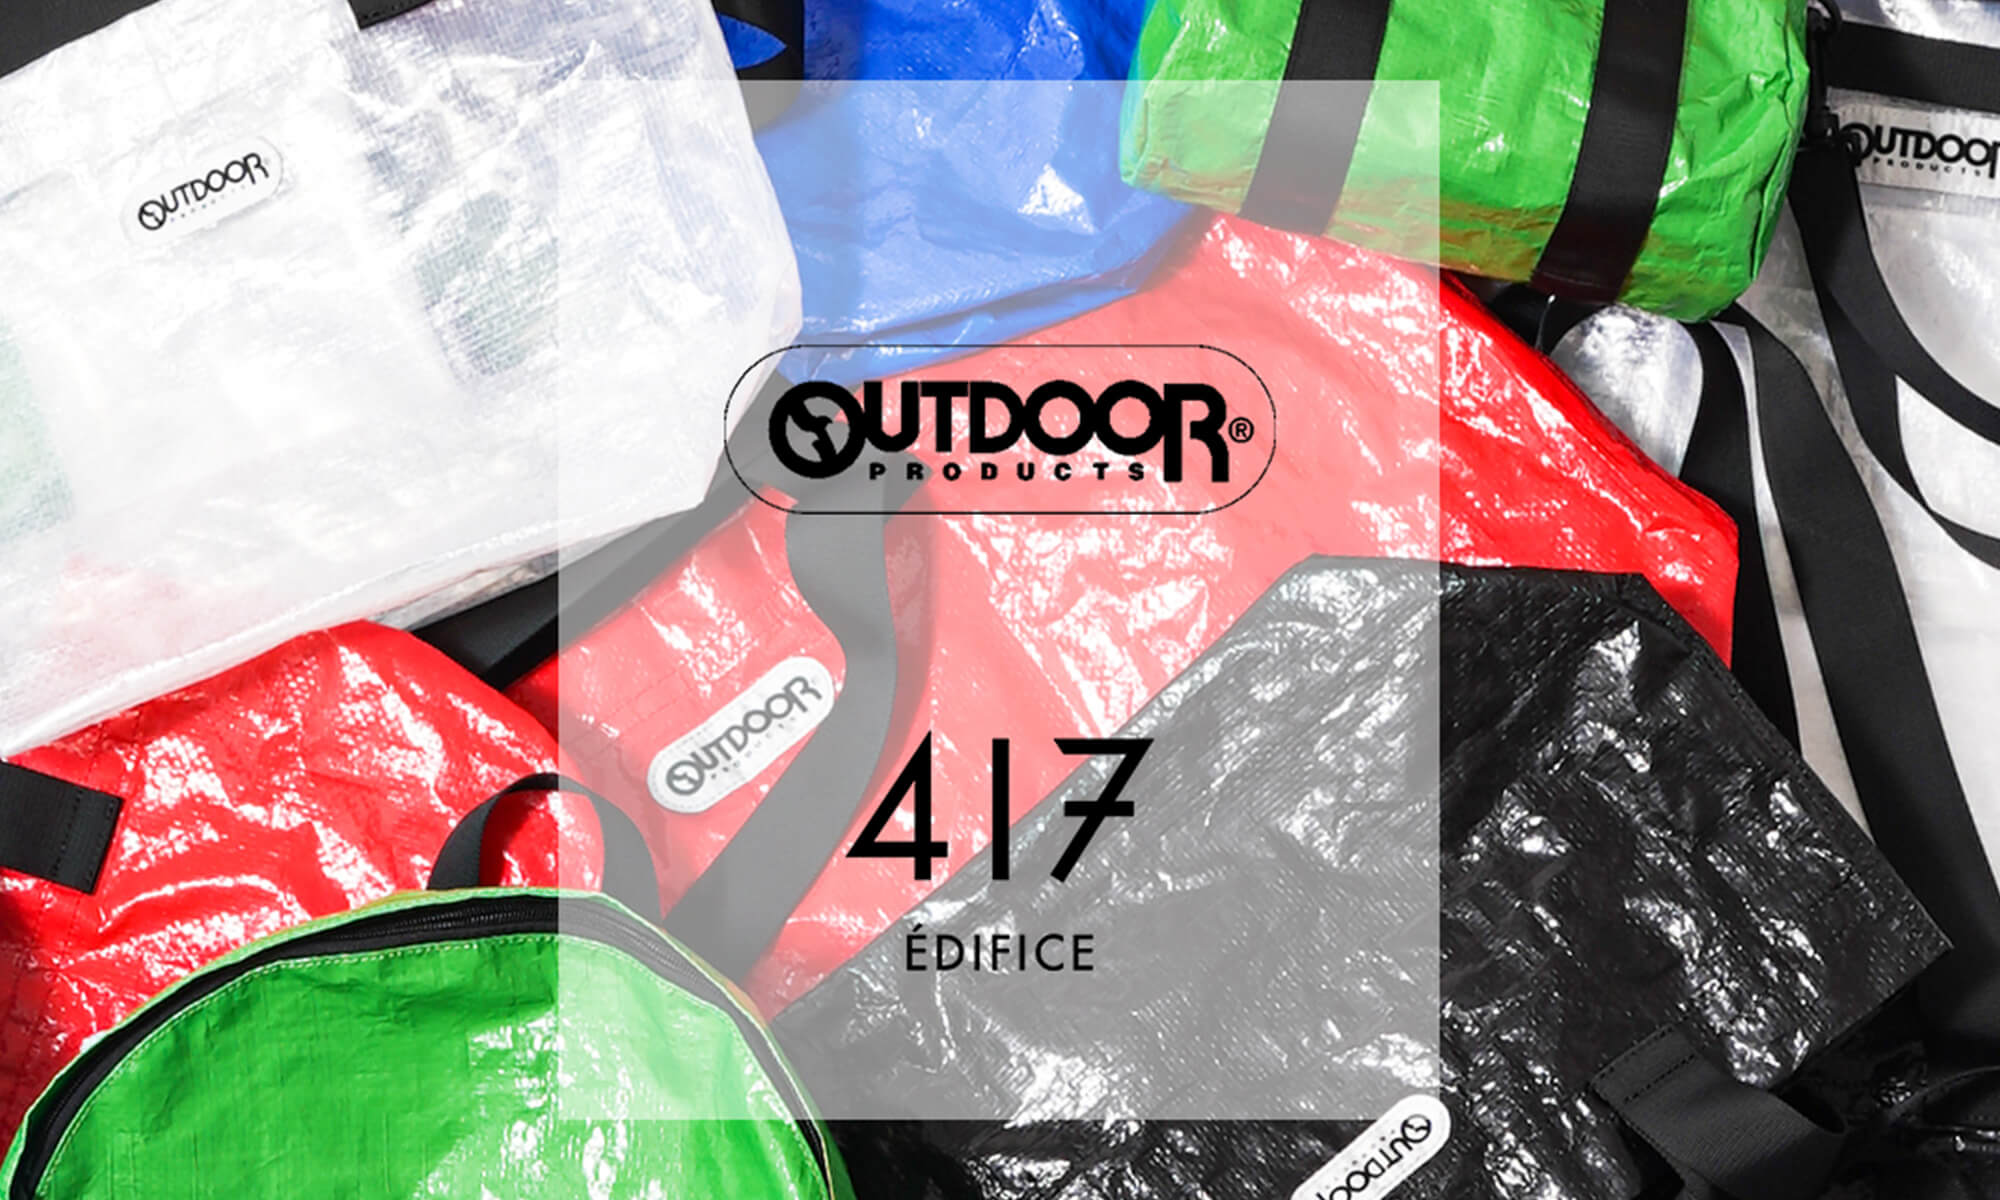 417 EDIFICE × OUTDOOR PRODUCTS “TOUCH” COLLECTION